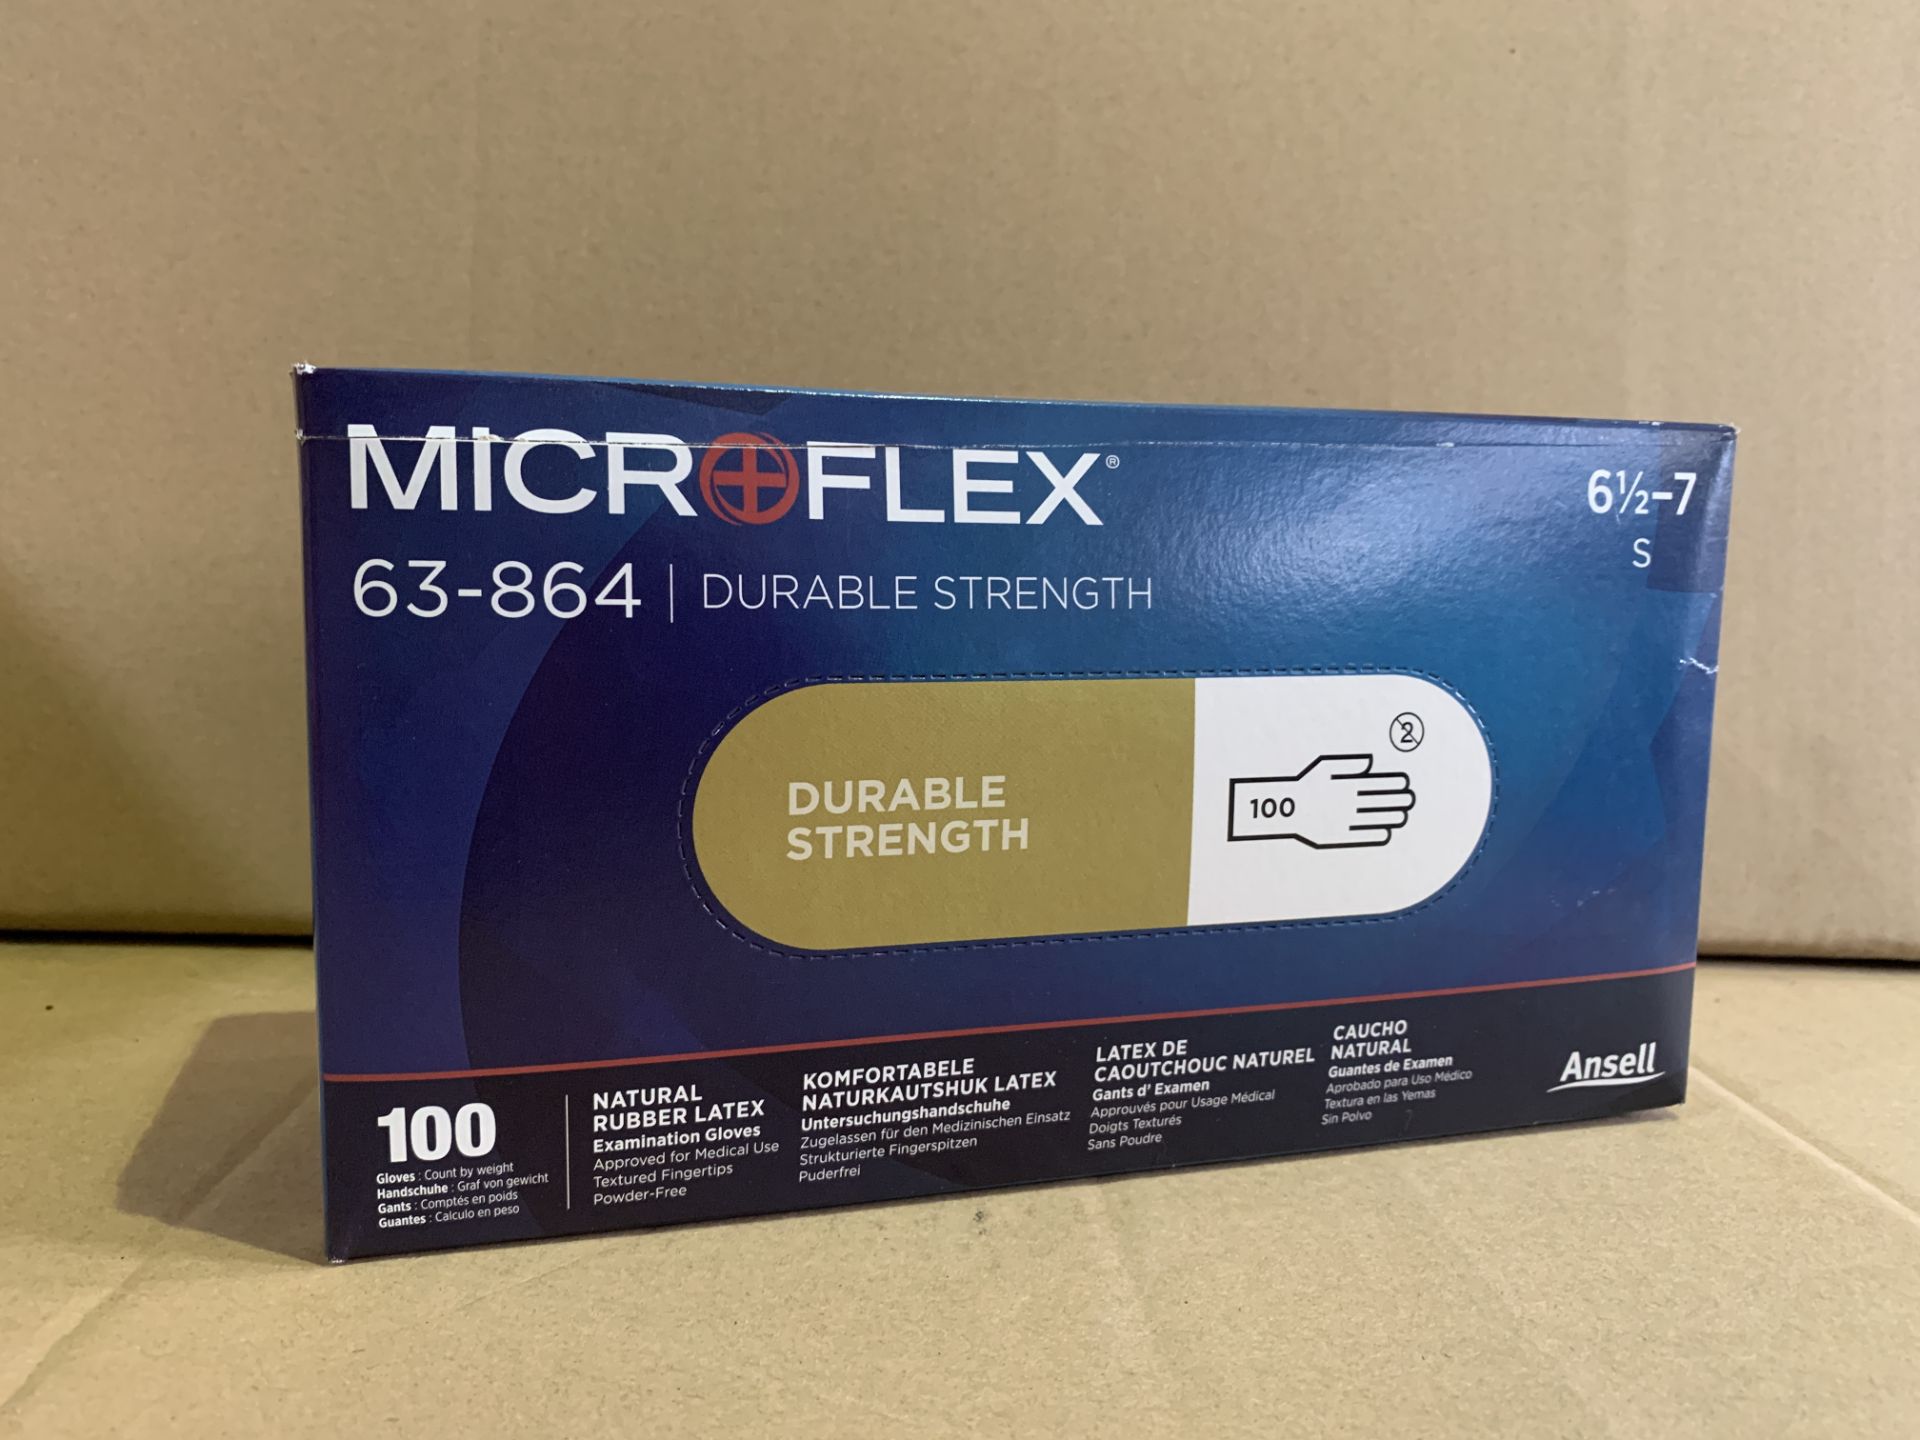 10 X BRAND NEW PACKS OF 100 MICROFLEX DURABLE STRENGTH RUBBER LATEX GLOVES SIZE SMALL R15